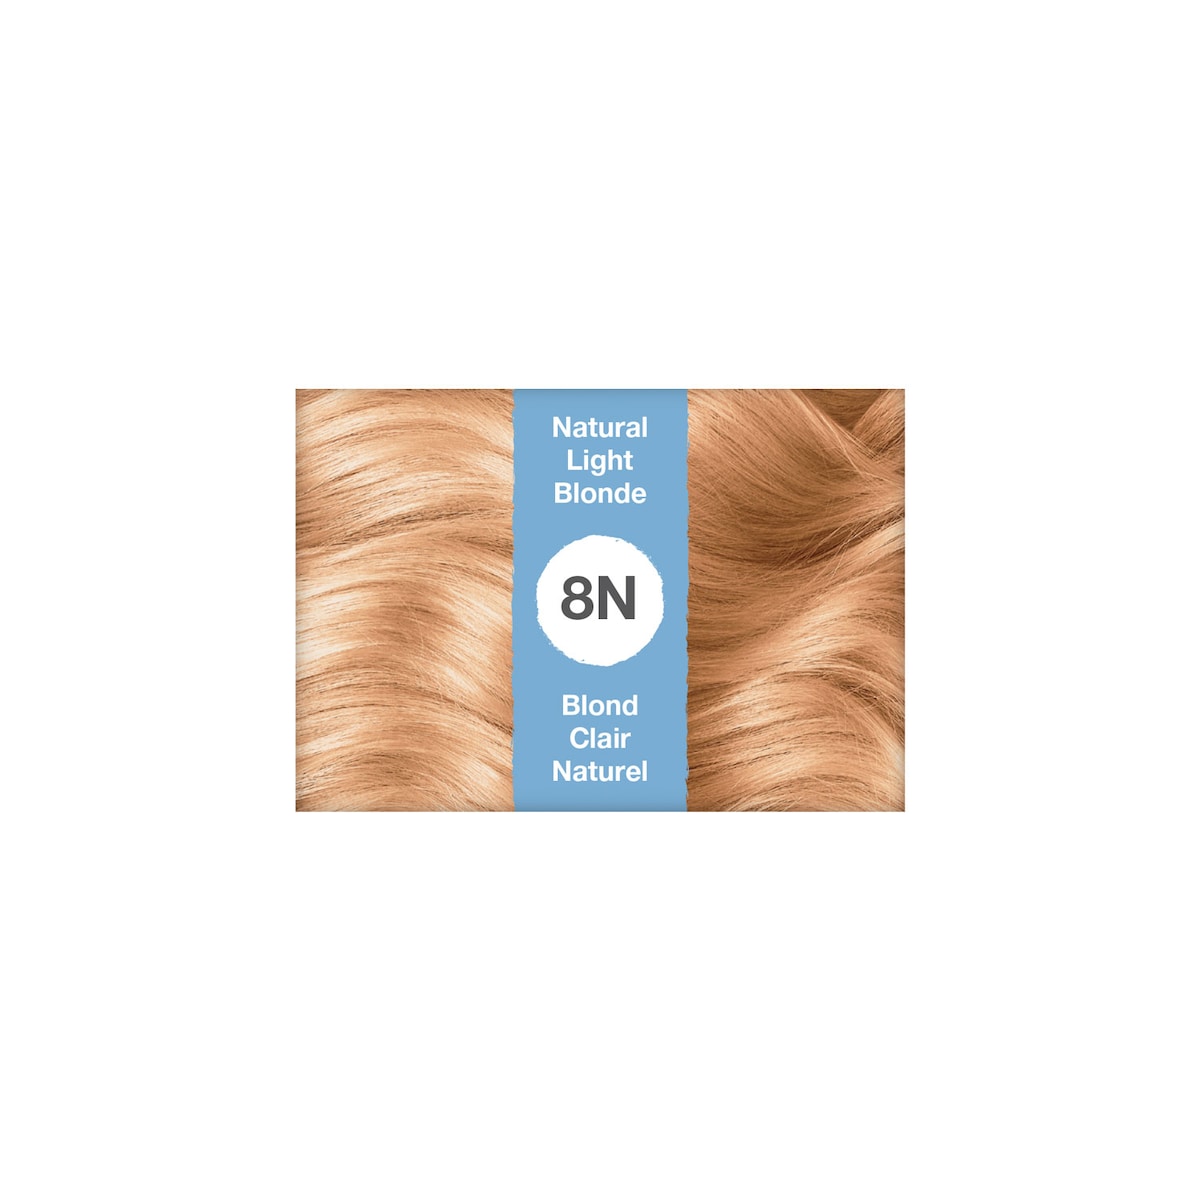 Tints of Nature 8N Natural Light Blonde Permanent Hair Colour 130ml